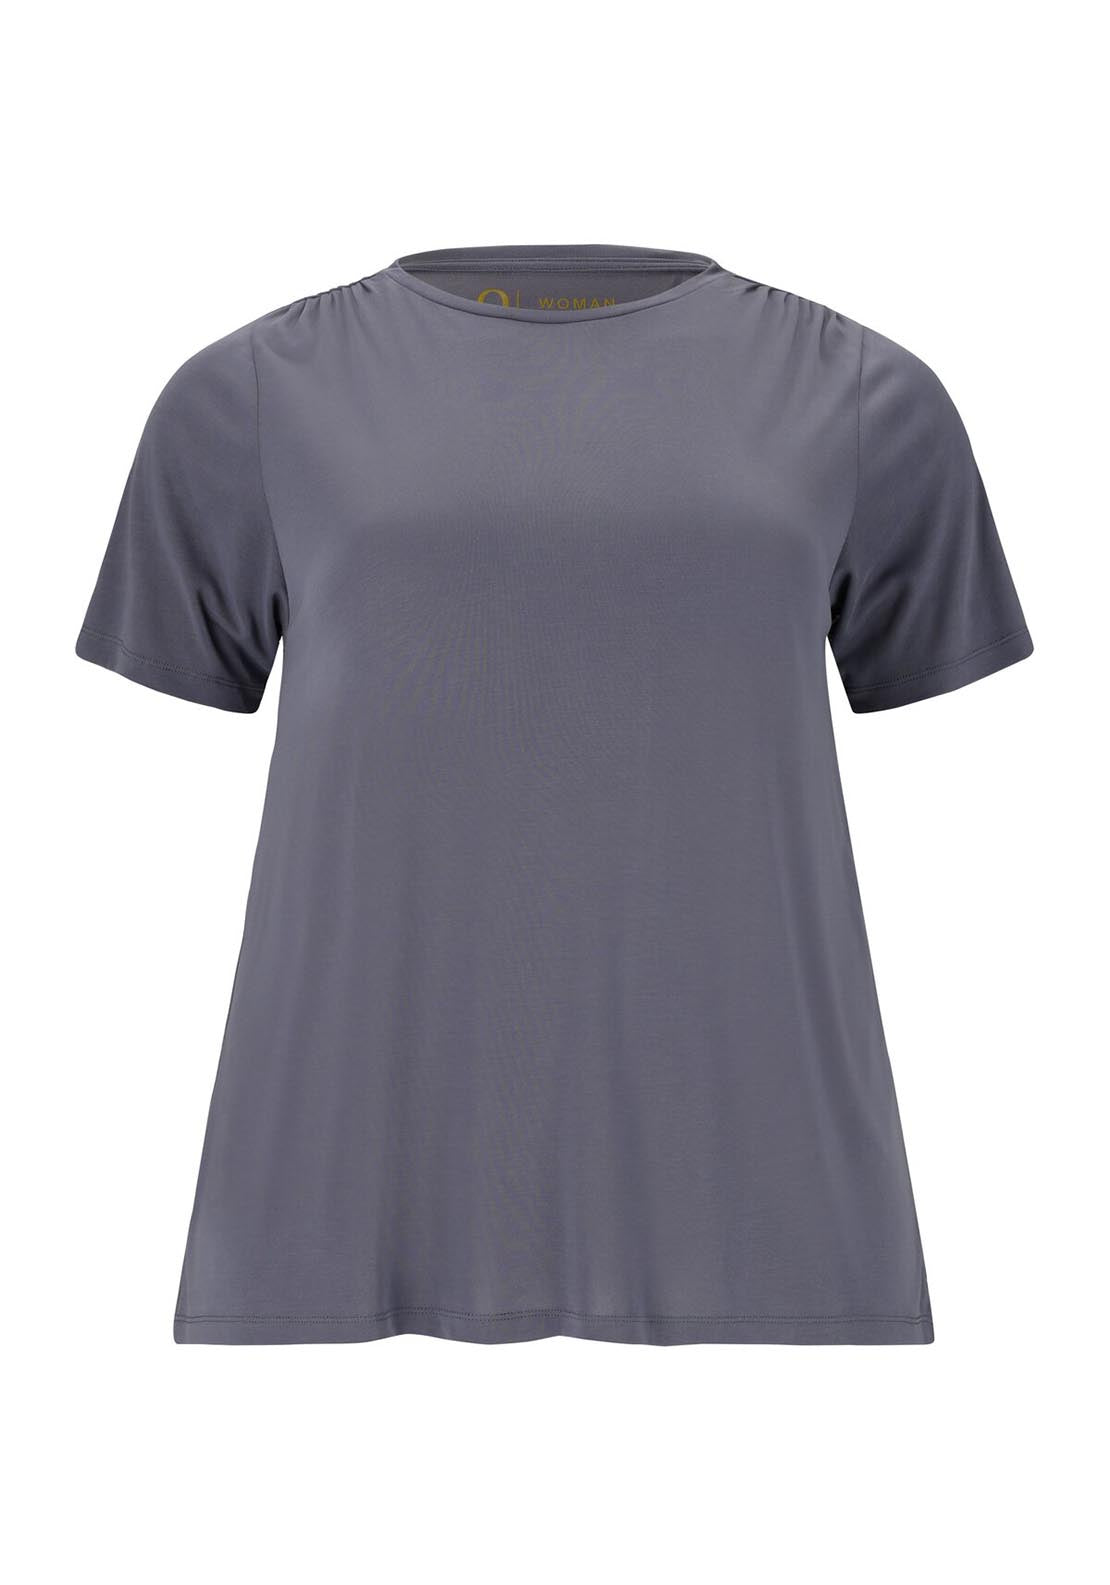 Q Zamilla Womens Loose Fit Short Sleeve Tee 7 Shaws Department Stores